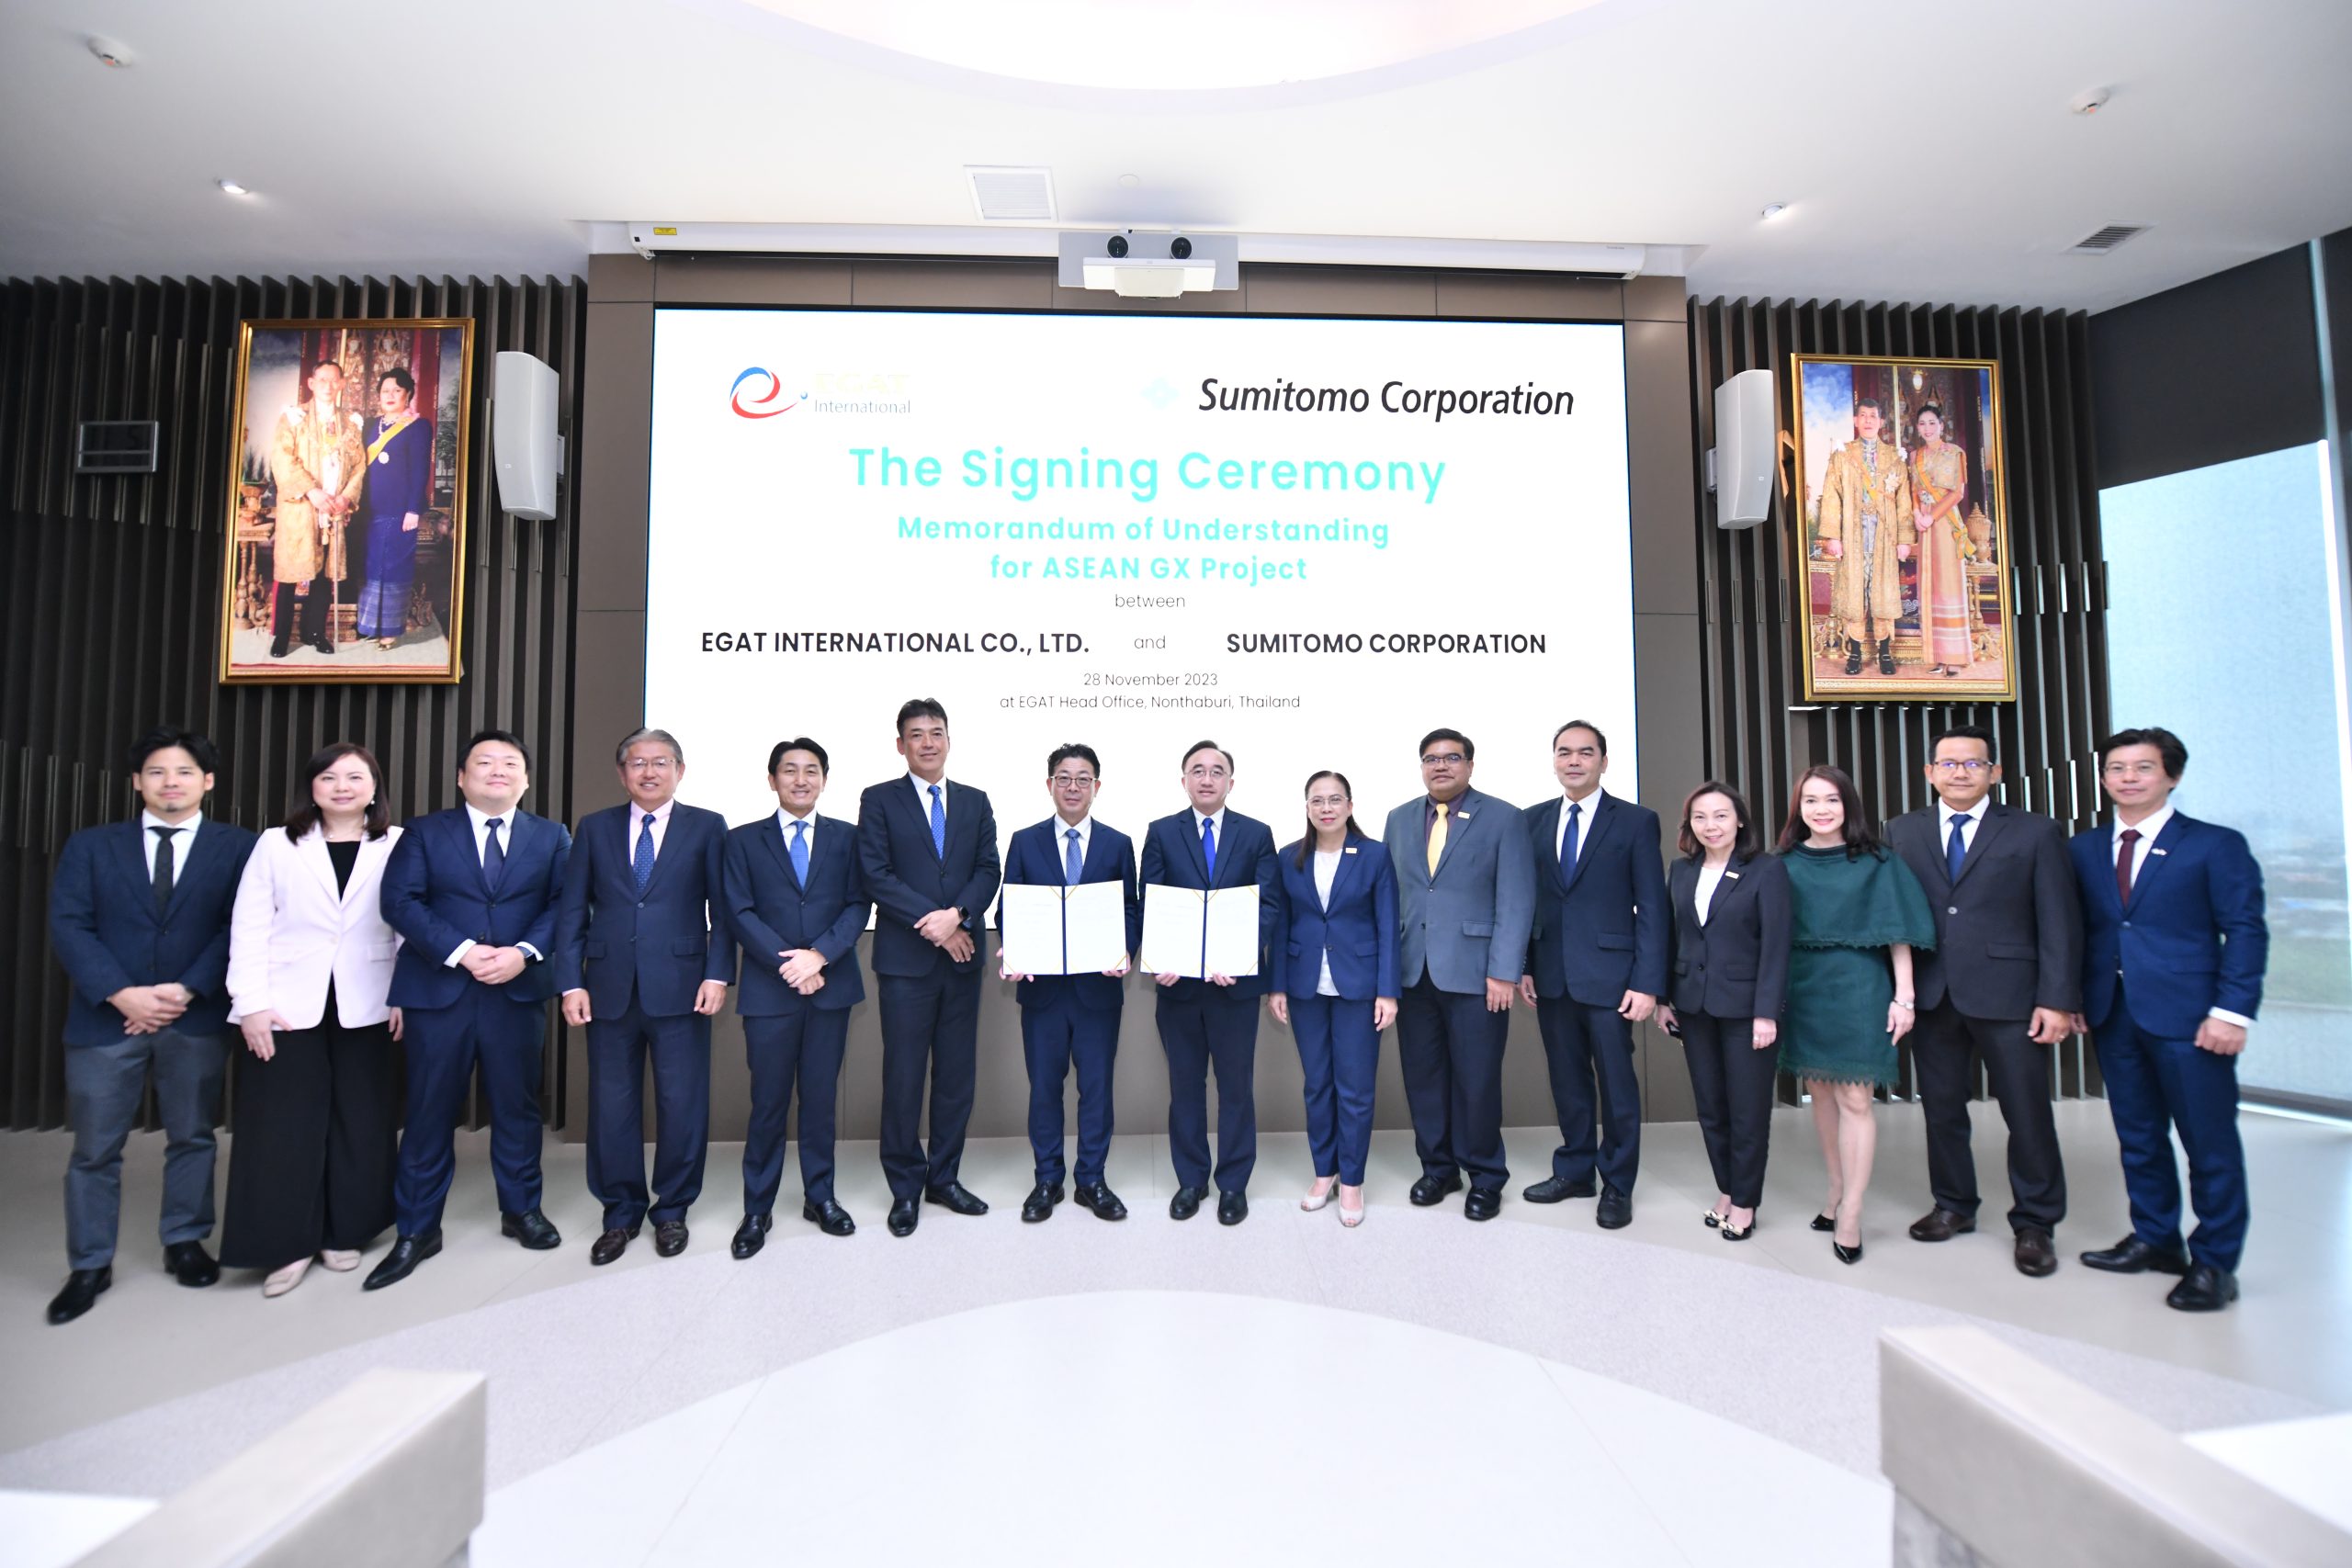 EGATi and Sumitomo Corporationjoin forces to accelerate green transformation in ASEAN